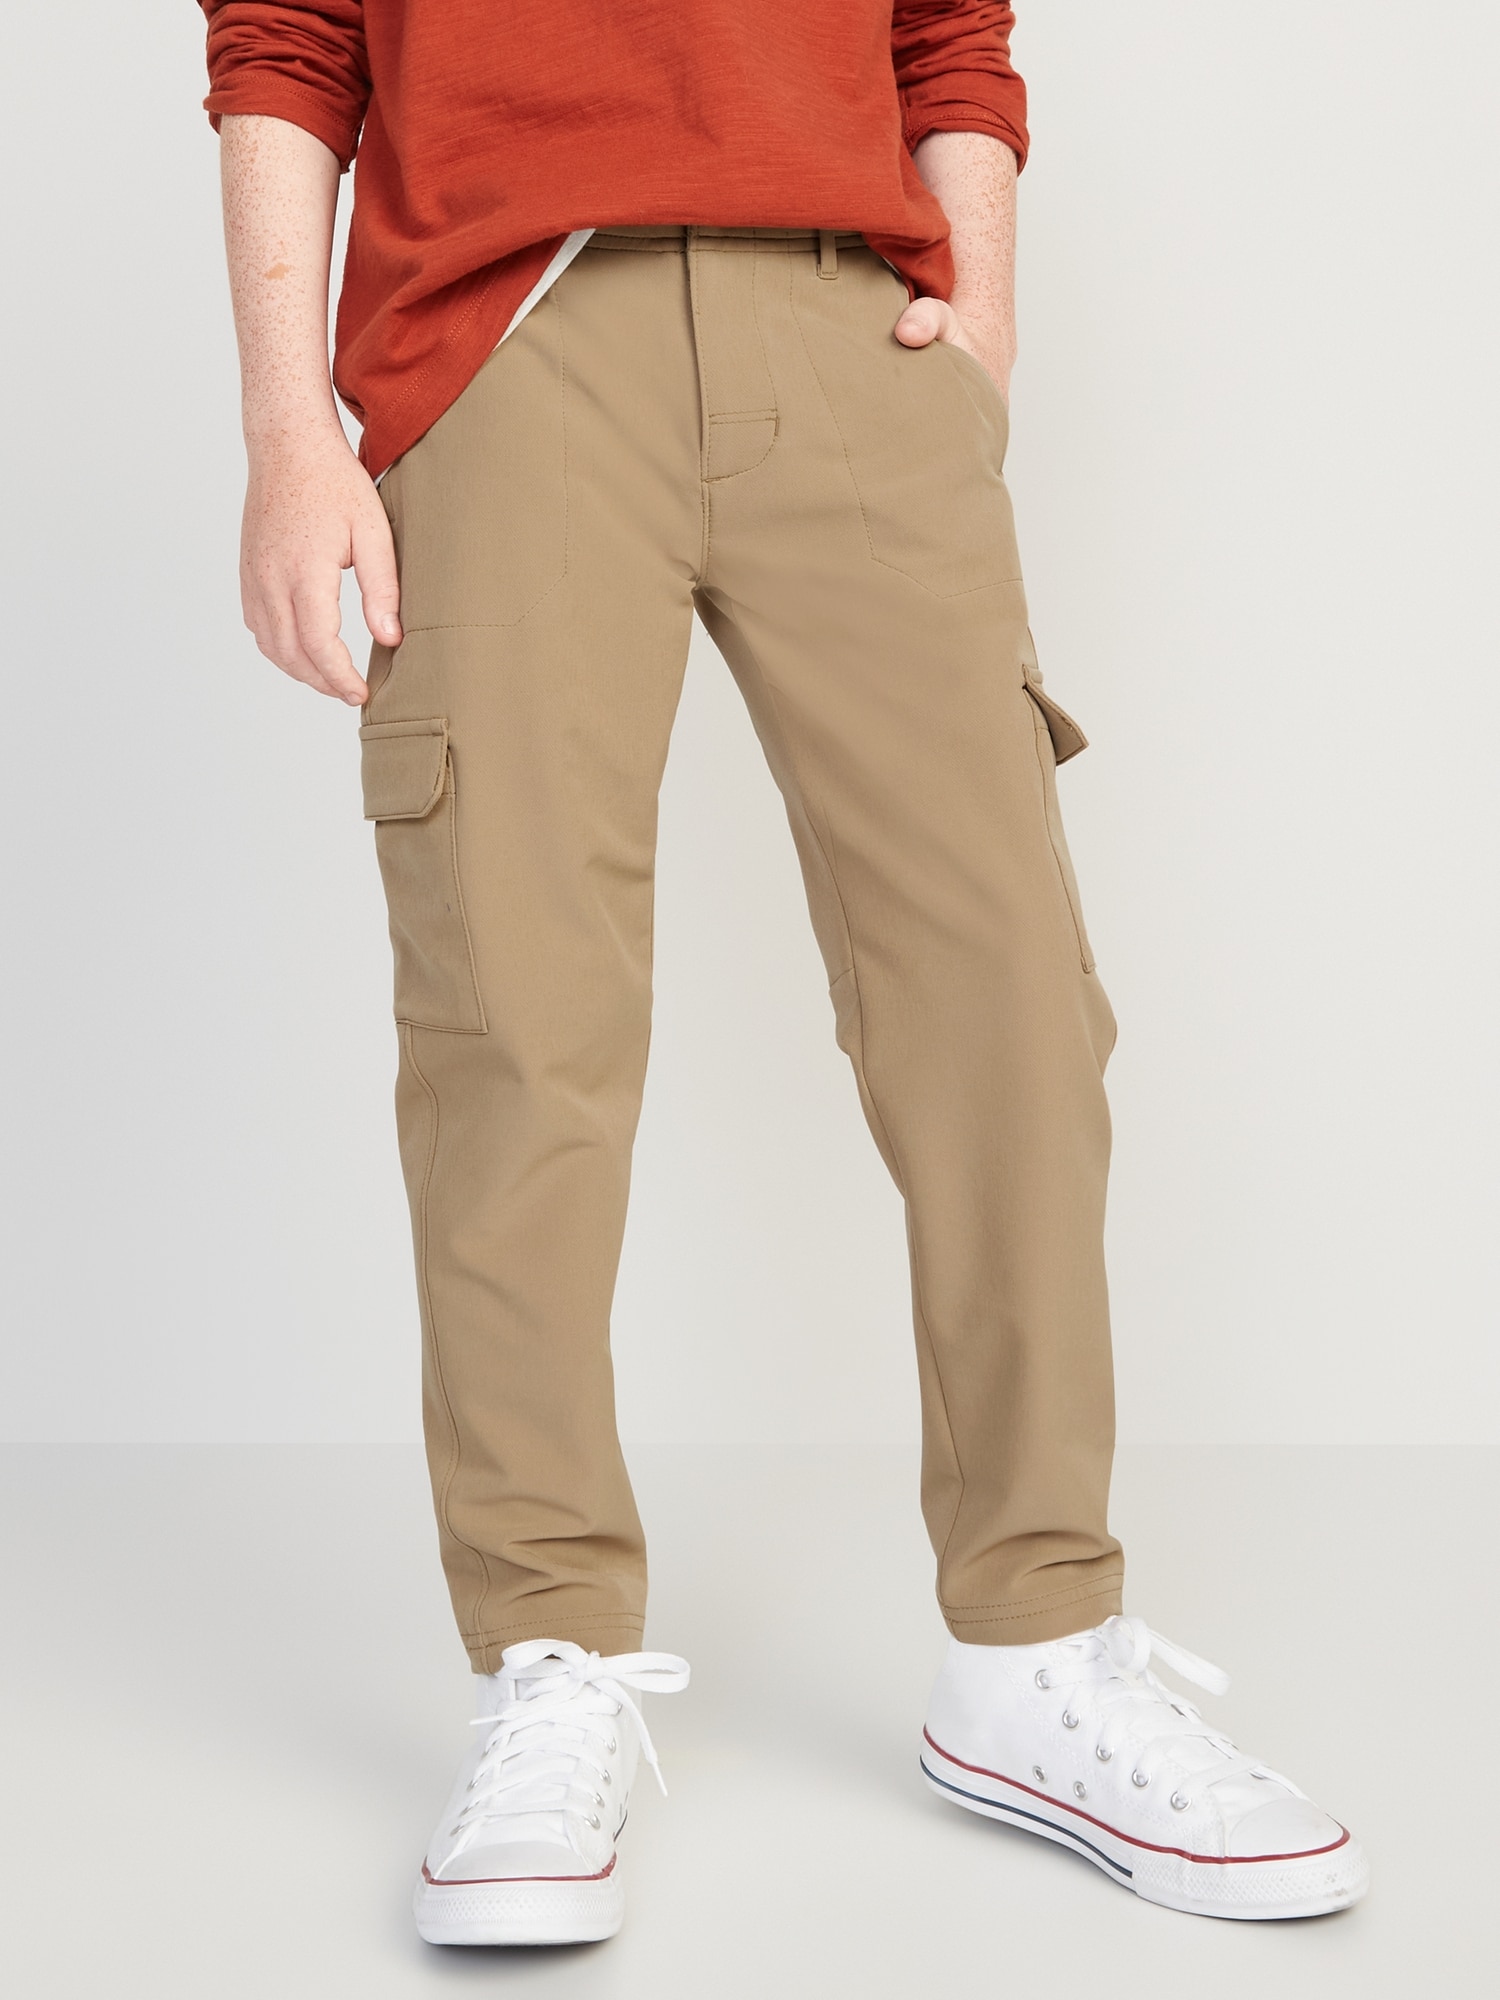 Stretchy Cargo Pants